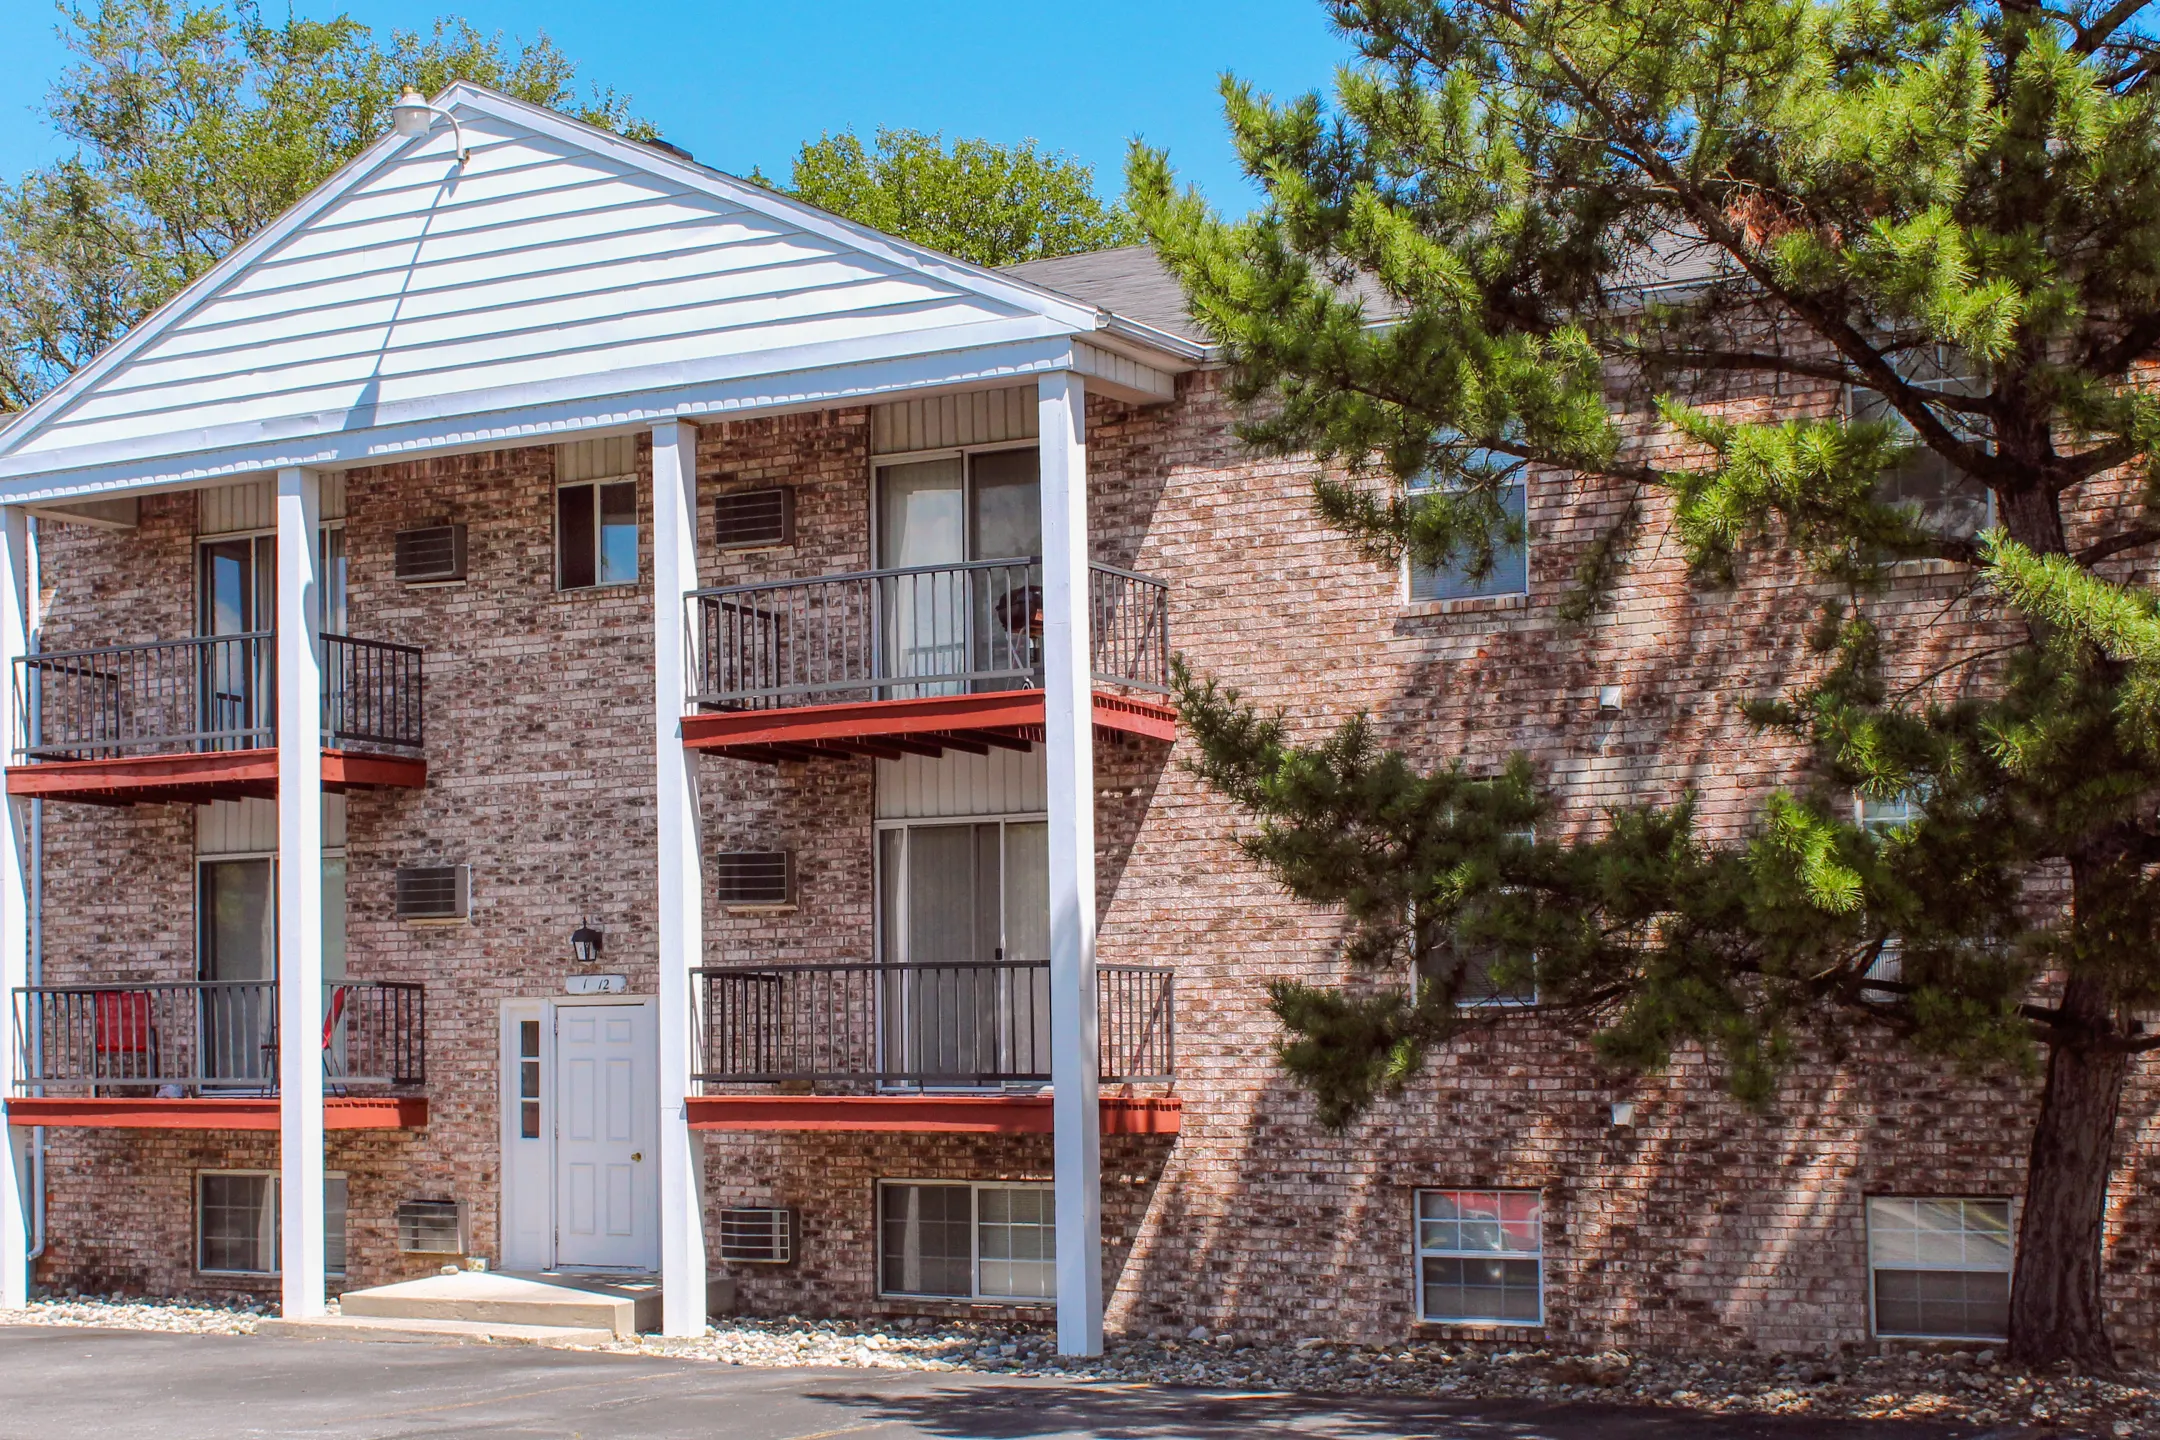 Building - Oak Hill Apartments - Maumee, OH